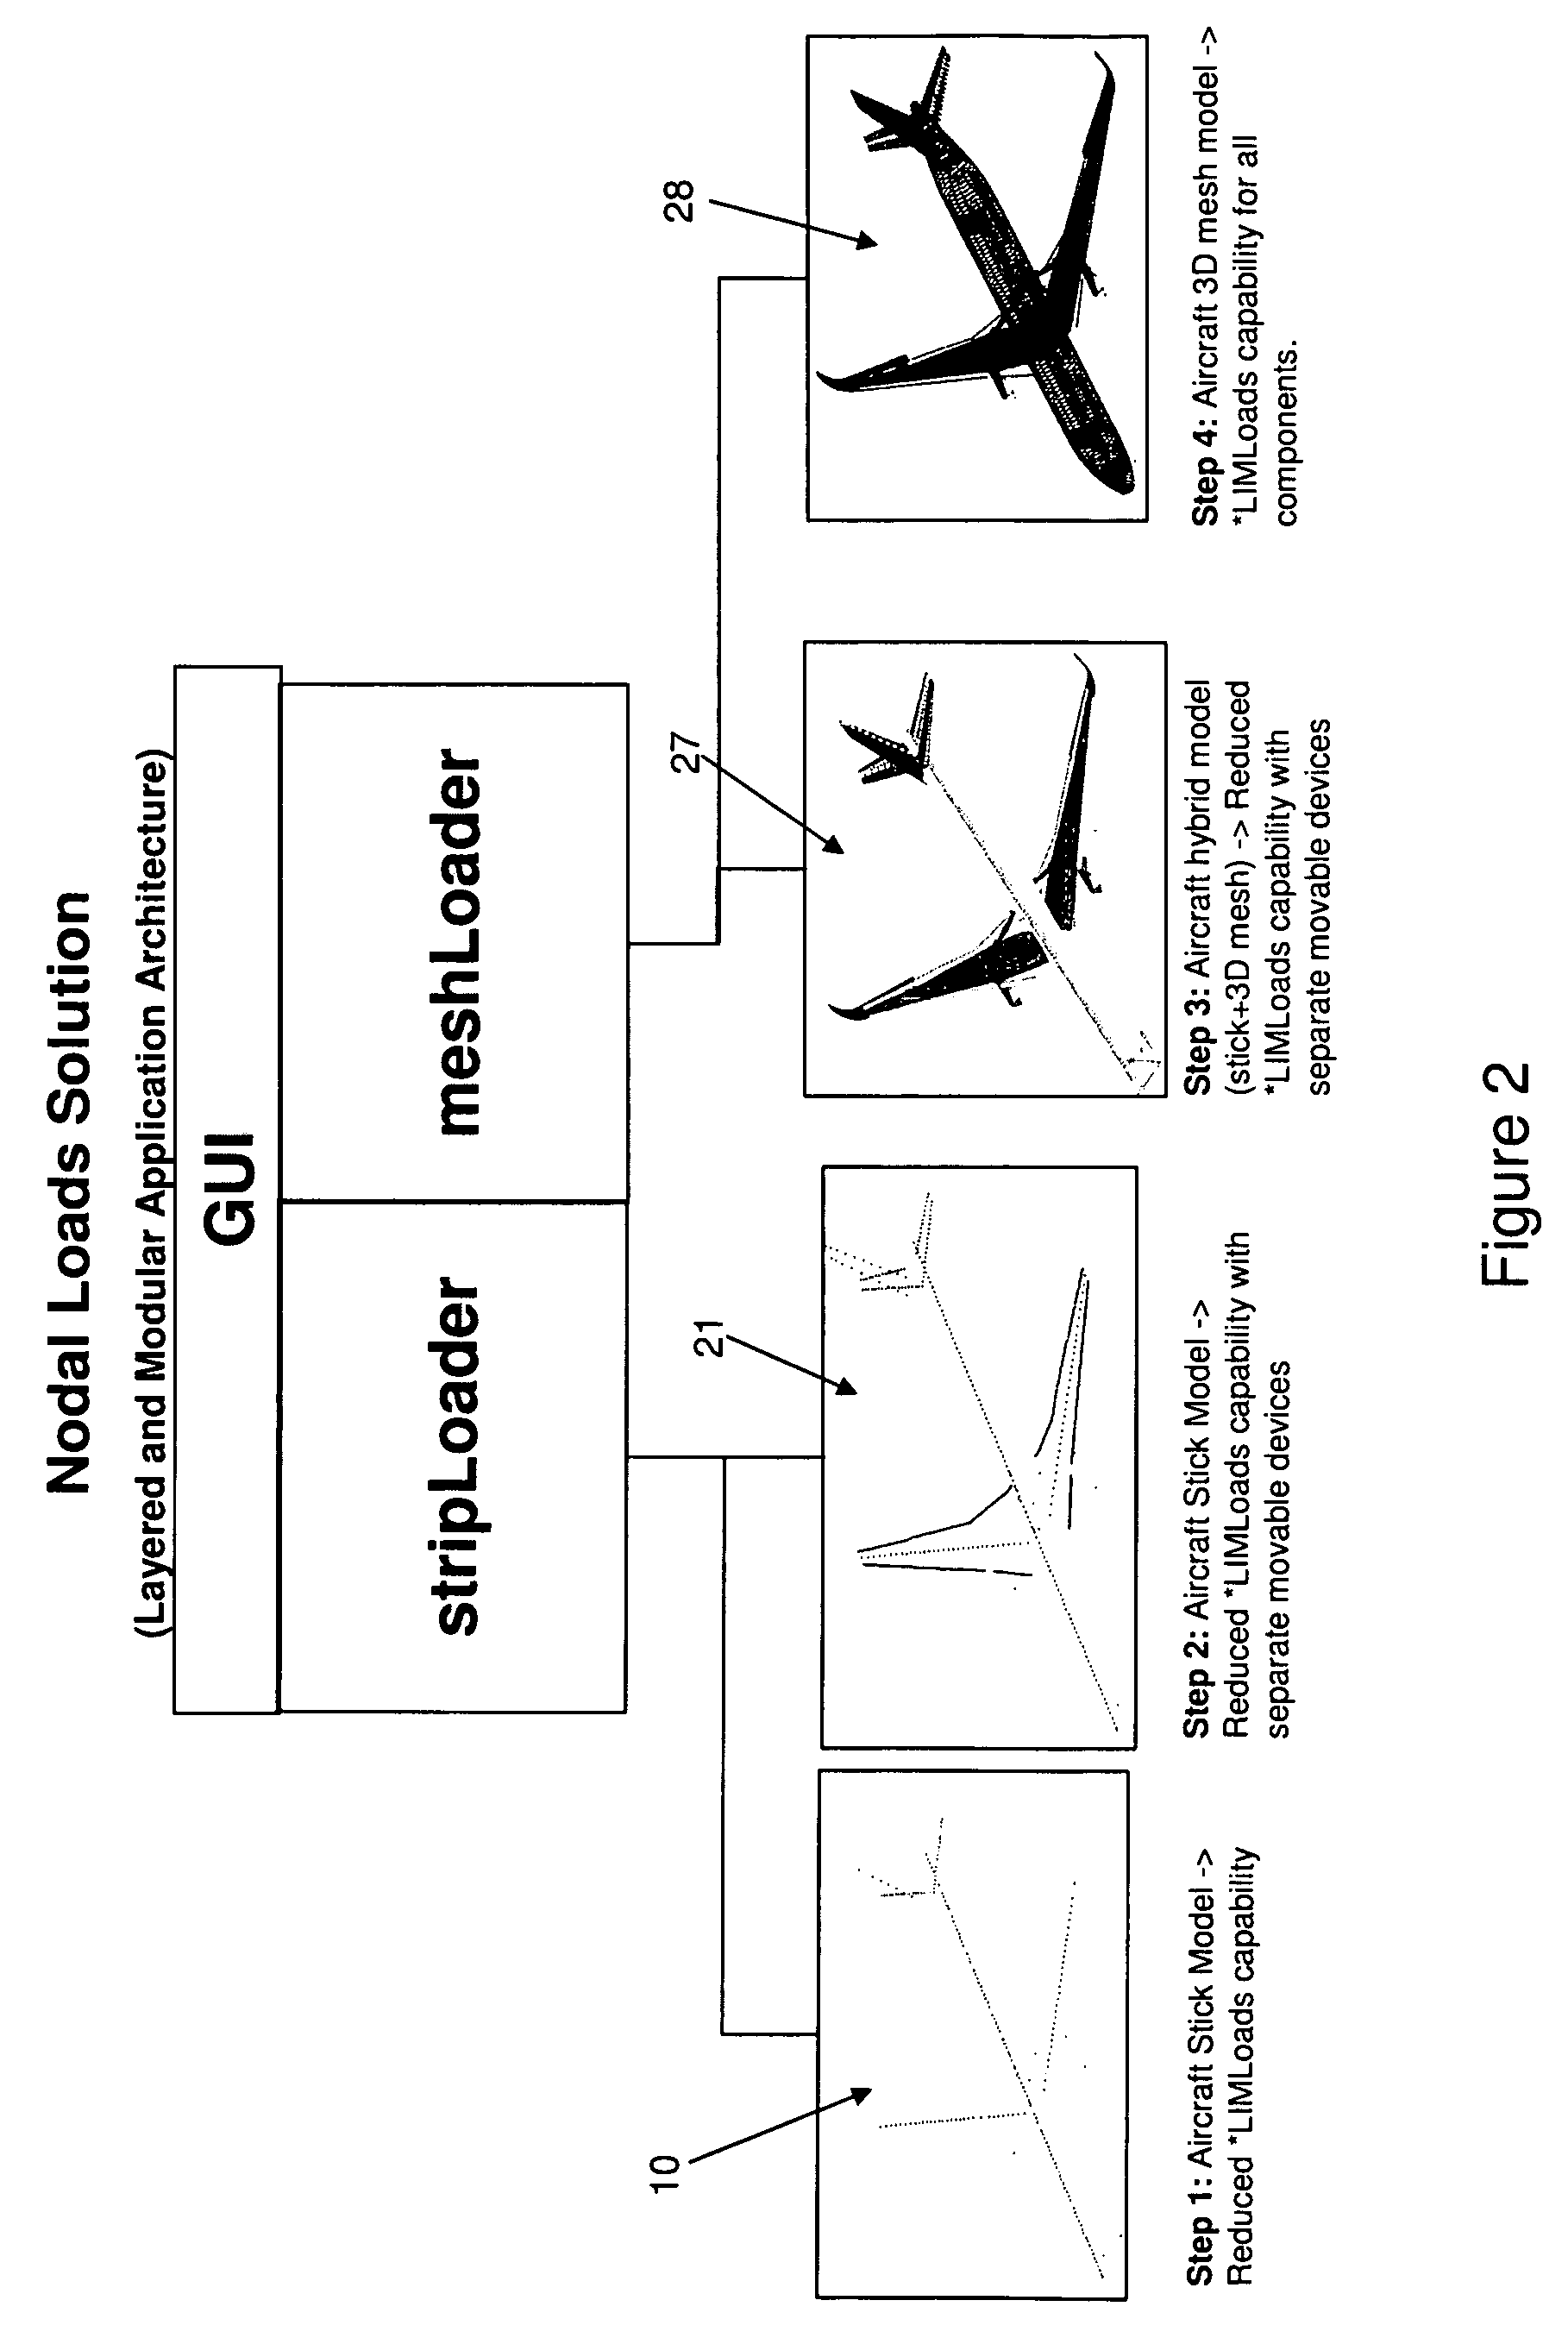 Method of designing an airfoil assembly